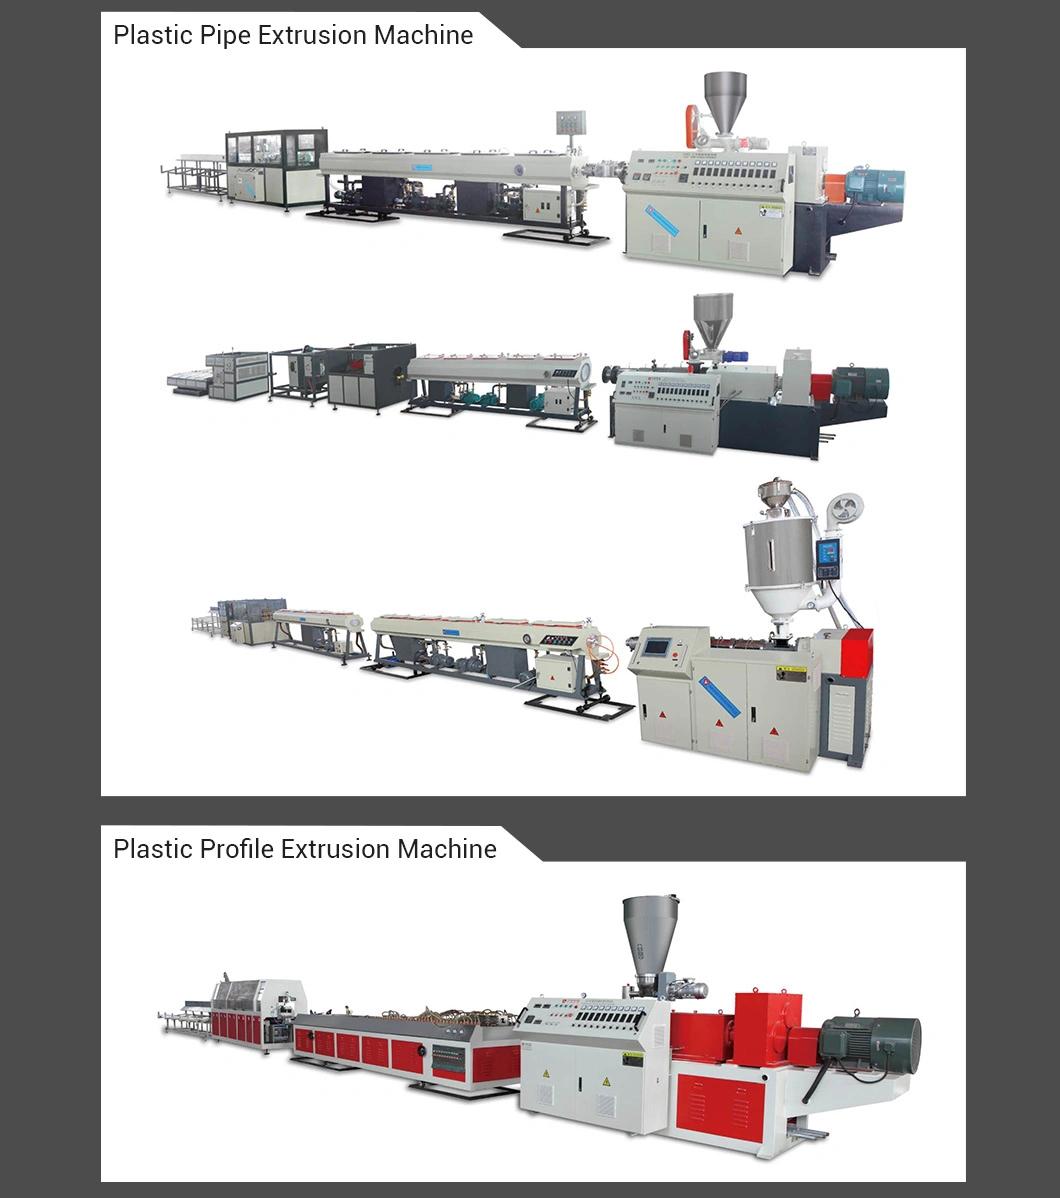 Yatong Mixed PVC CaCO3 and Others Raw Material PVC Pipe Extrusion Line